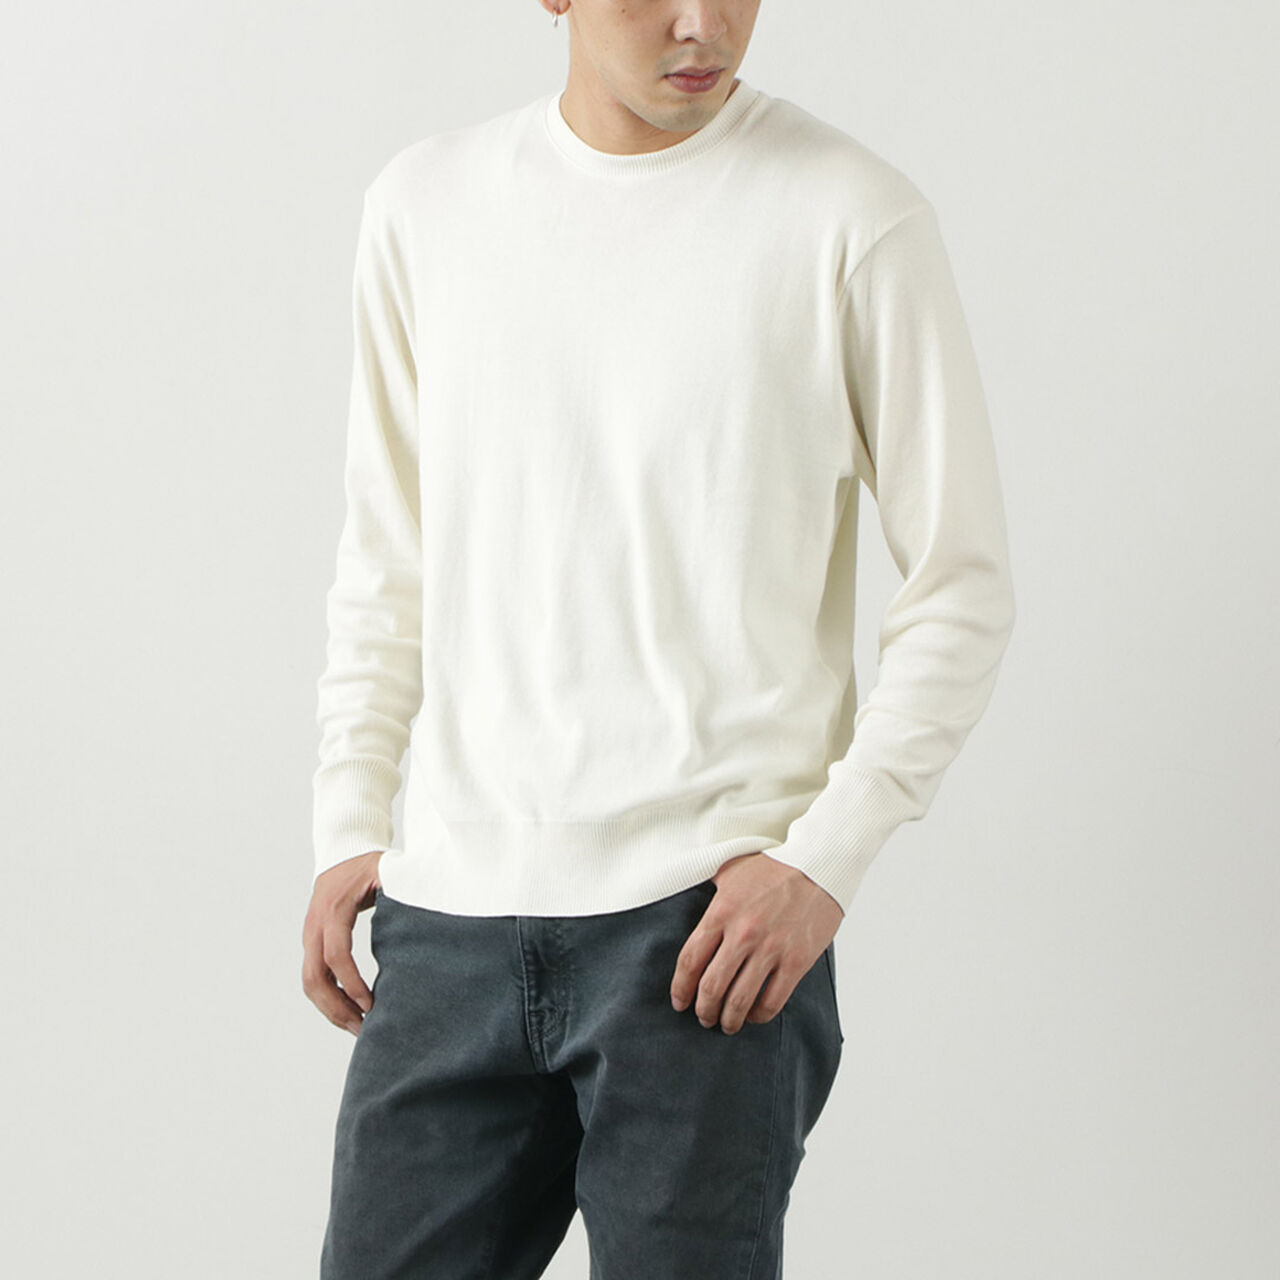 Lupo Crew Neck Relaxed Fit Knit Sewn,Panna, large image number 0